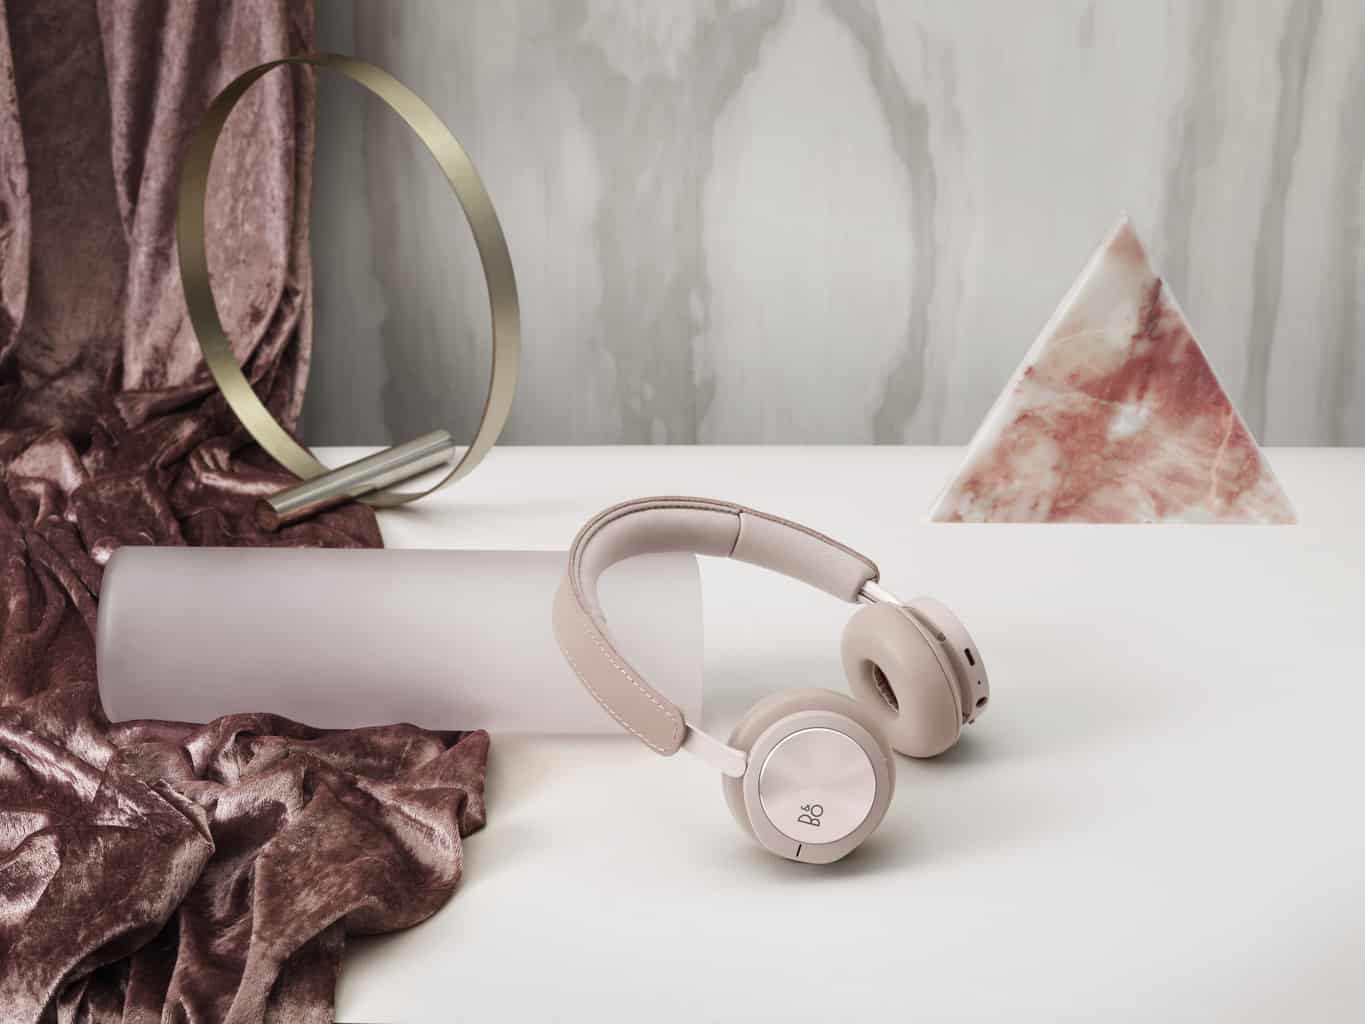 The Beoplay E8 2.0 and H8i headphones